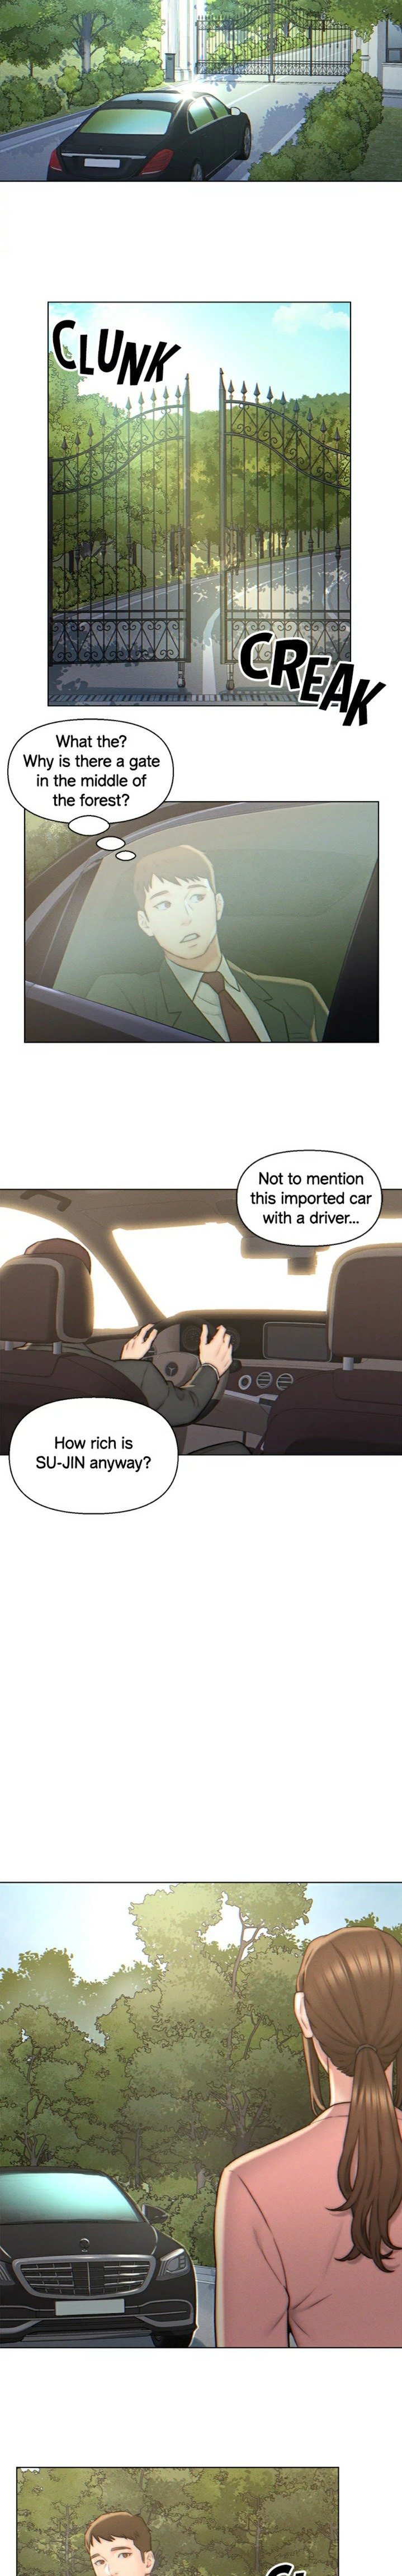 live-in-son-in-law-chap-3-3